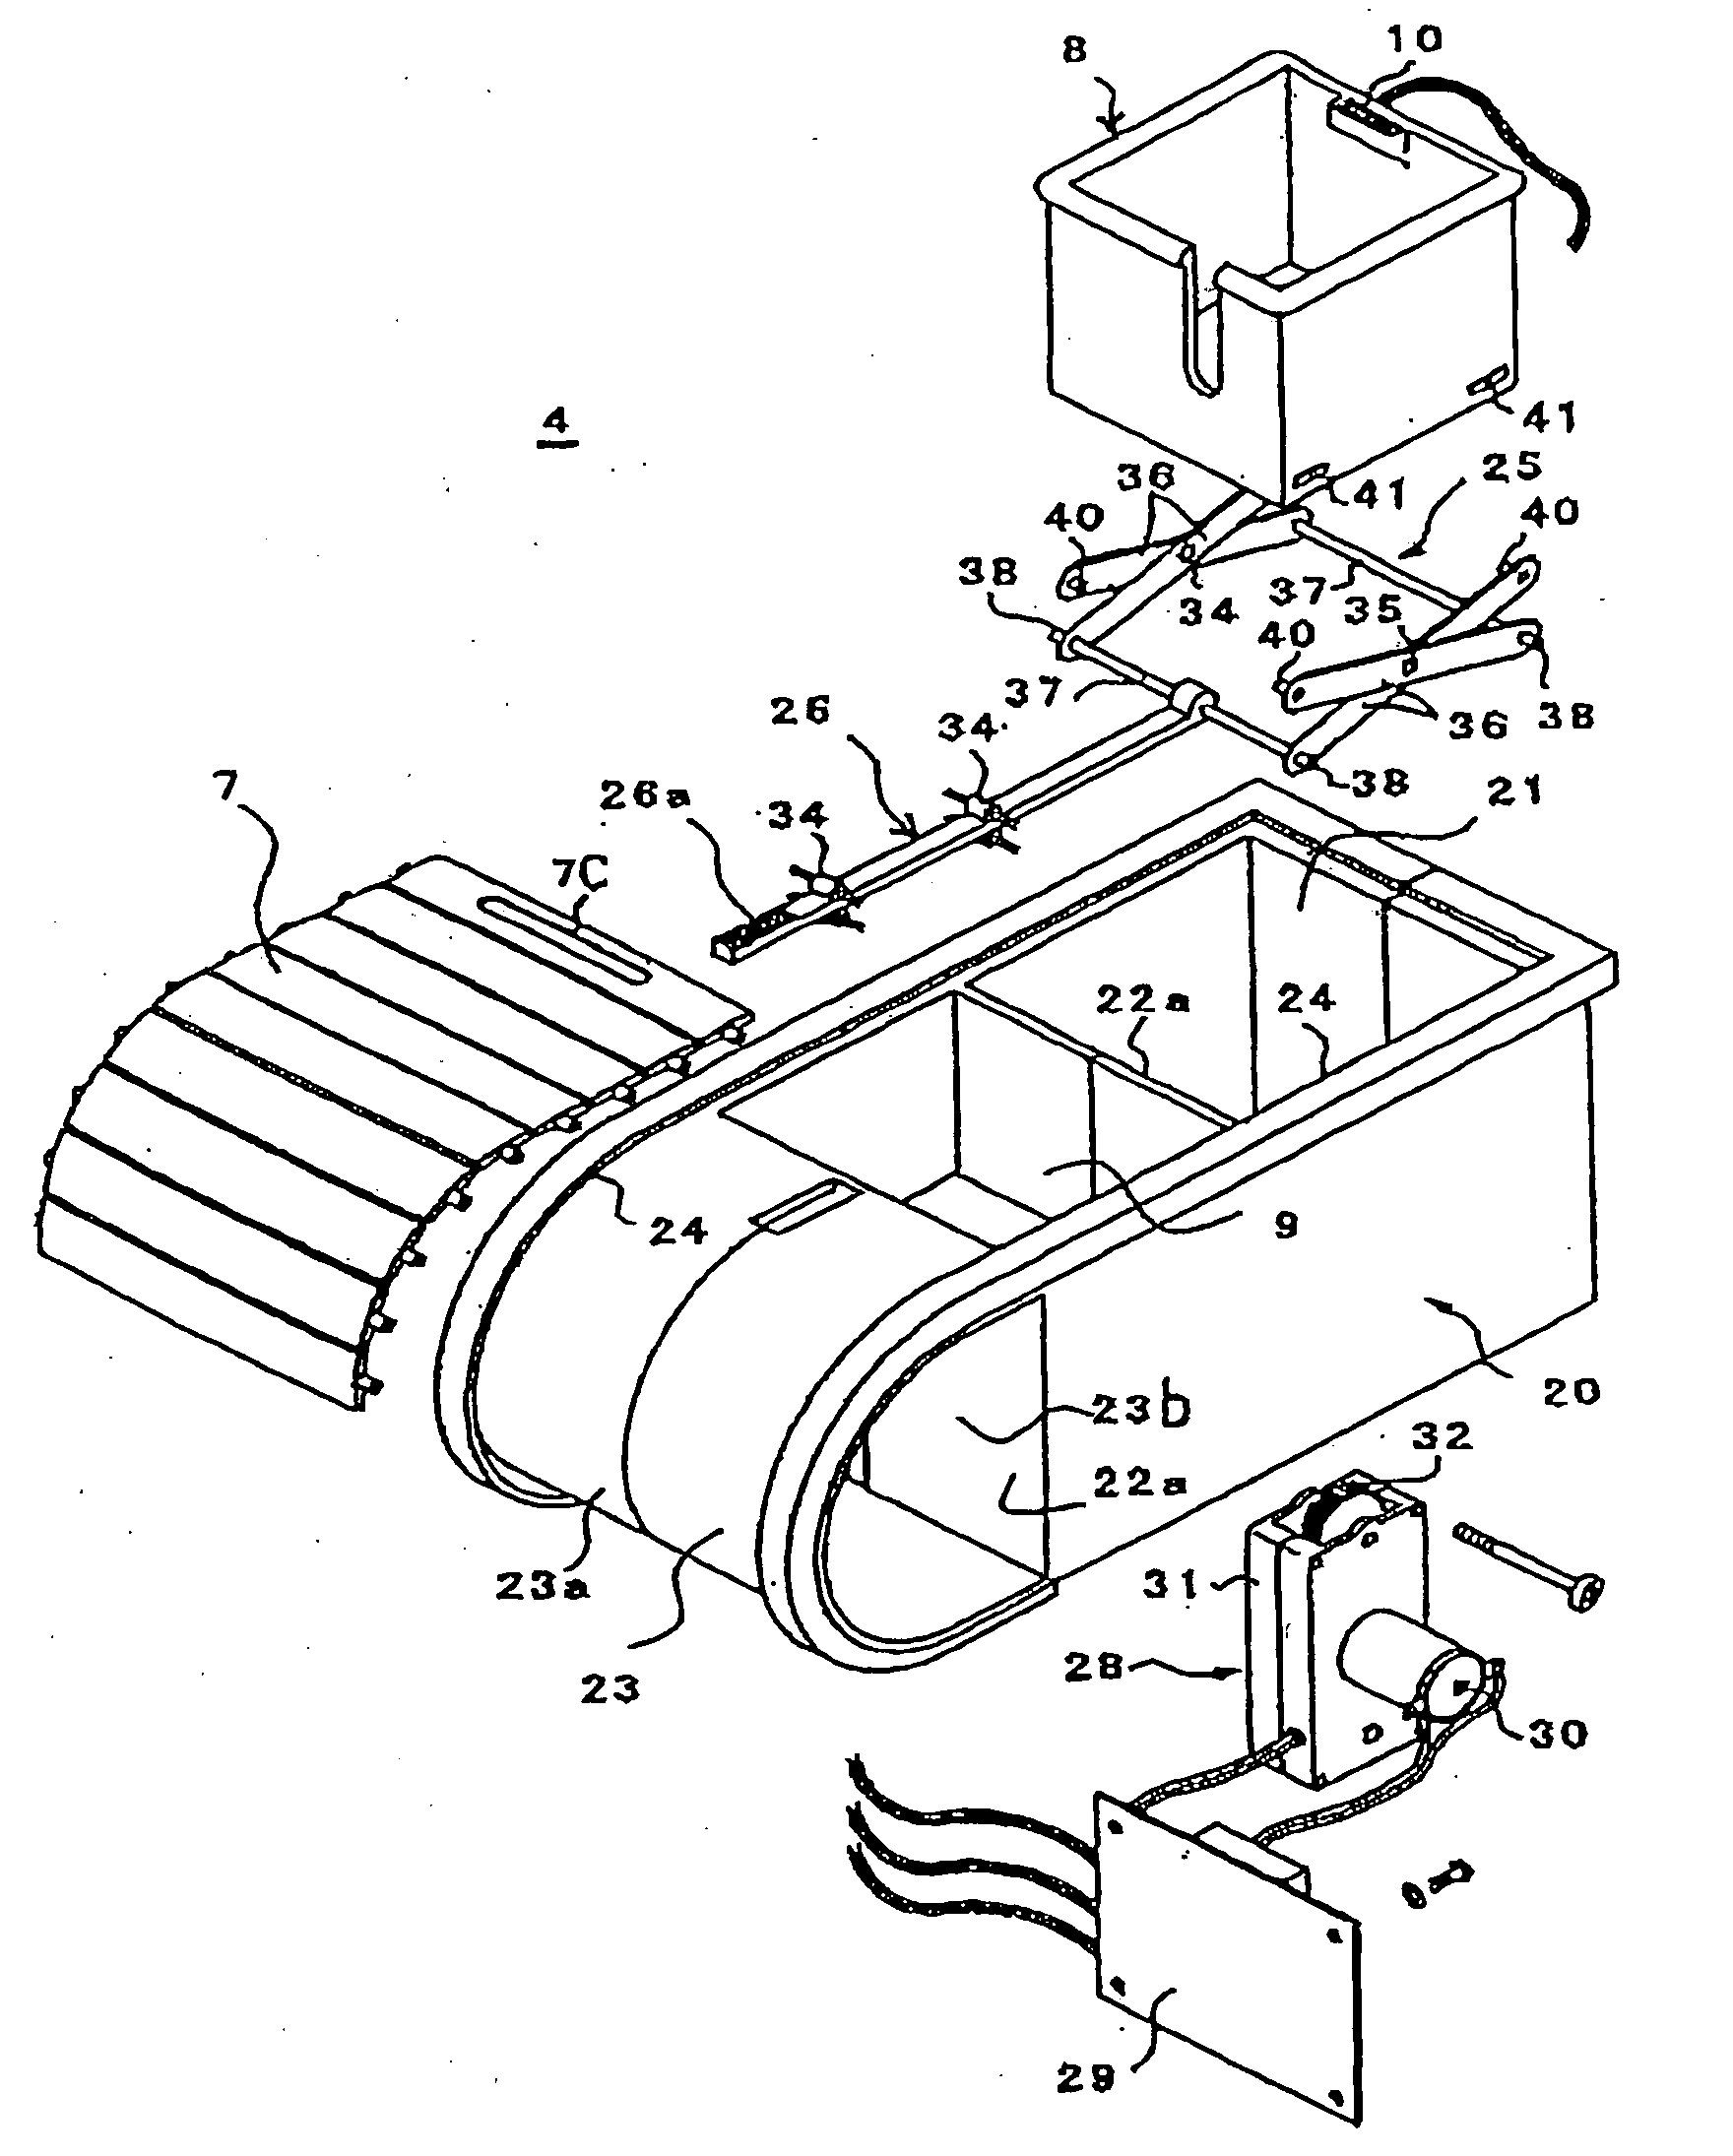 Configuration for Operating Interior Device and Cup Holder Using the Same